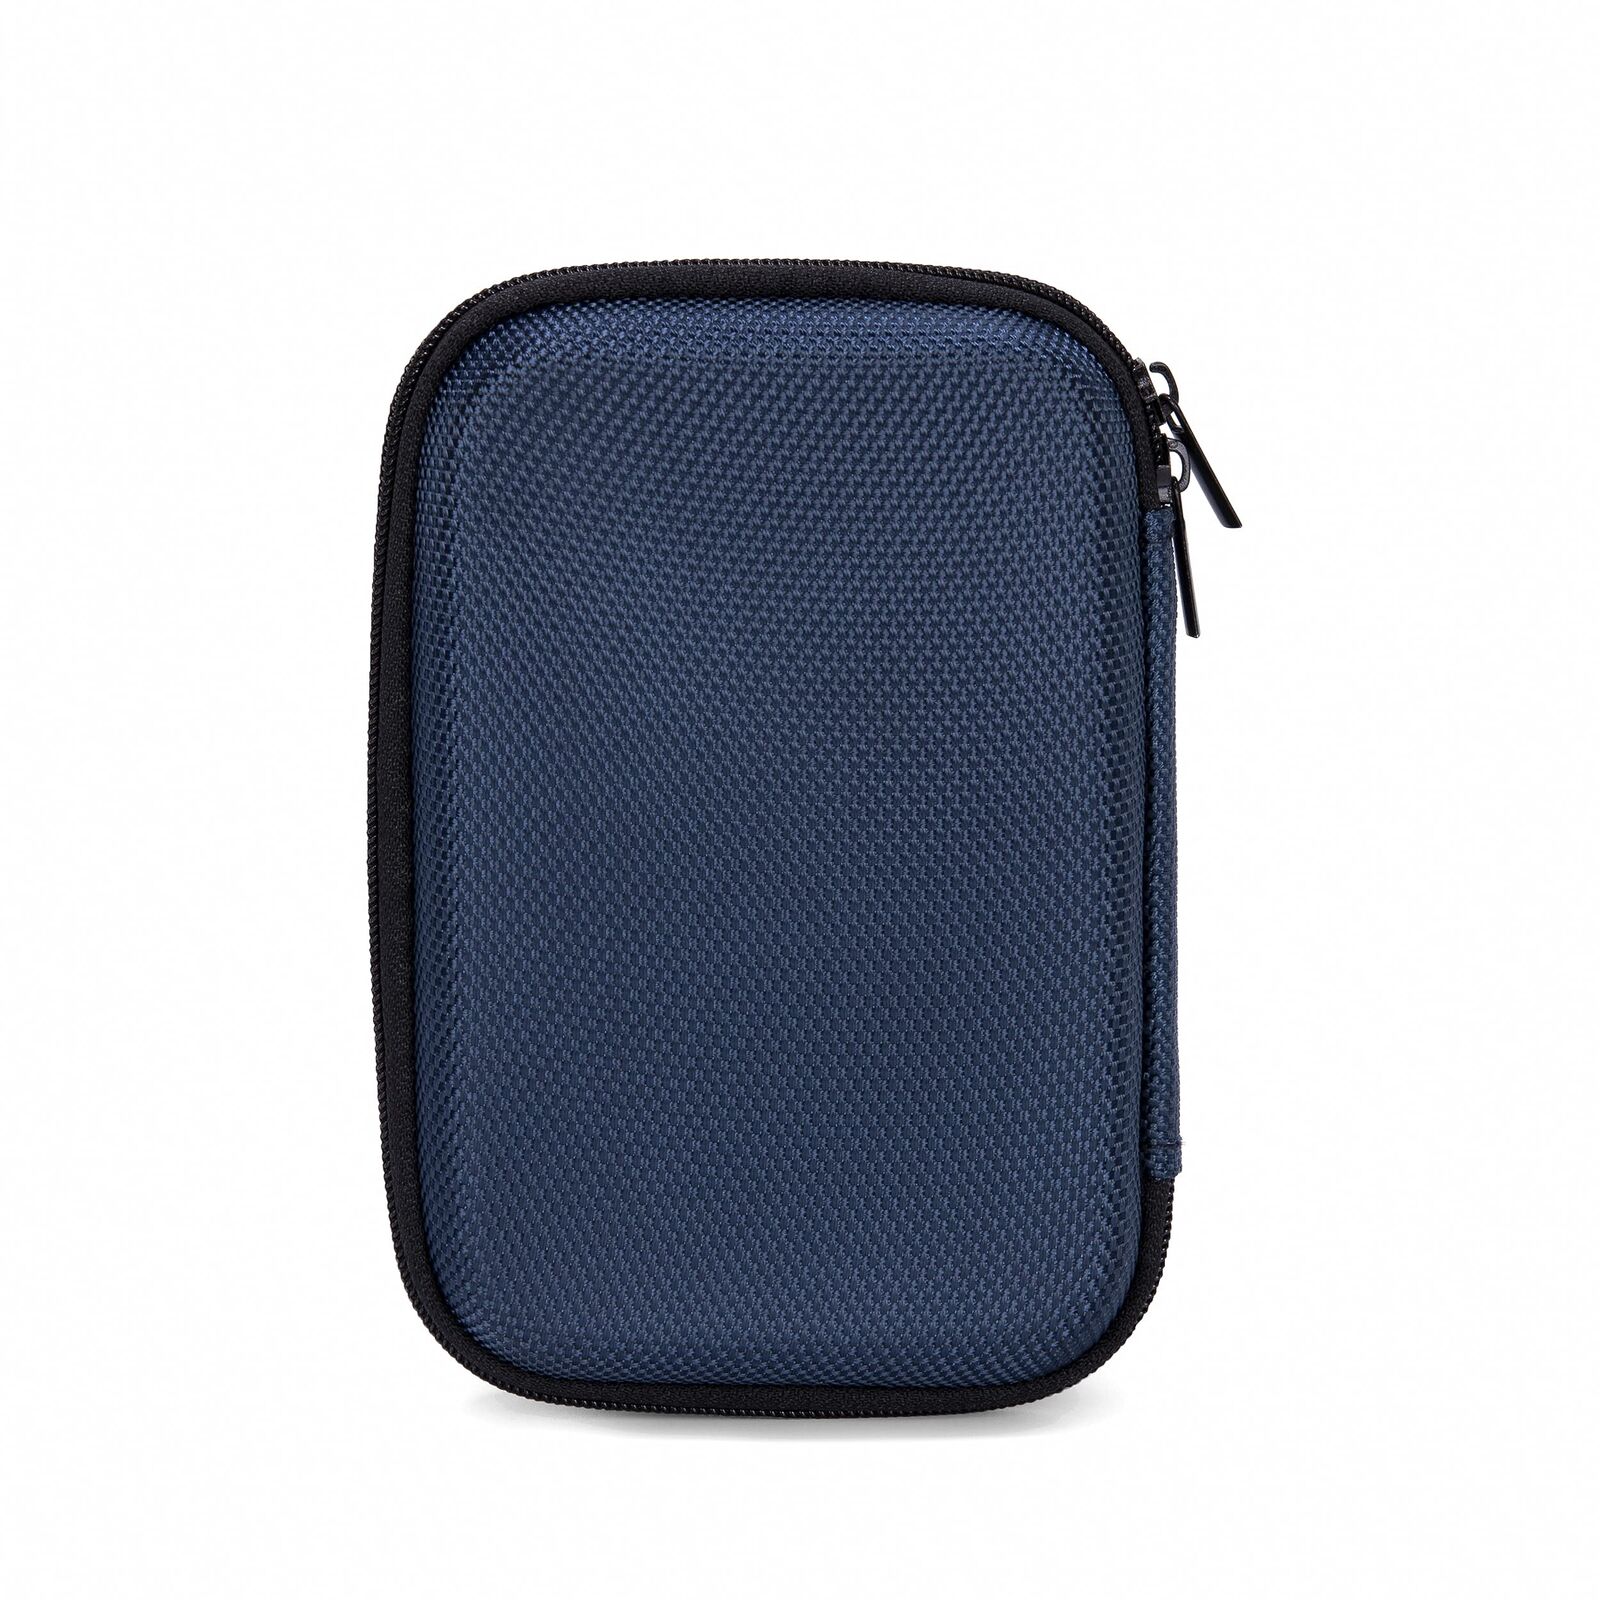 EVA Hard Carrying Small Hard Drive Case Compatible with WD Elements,My Passpo...